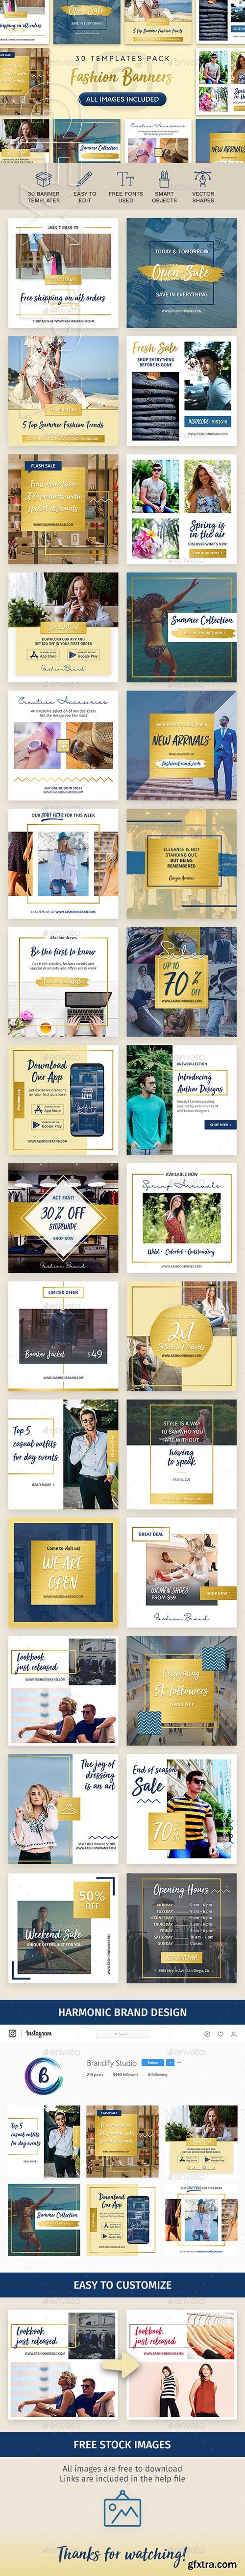 Graphicriver - Instagram Banners 22093370